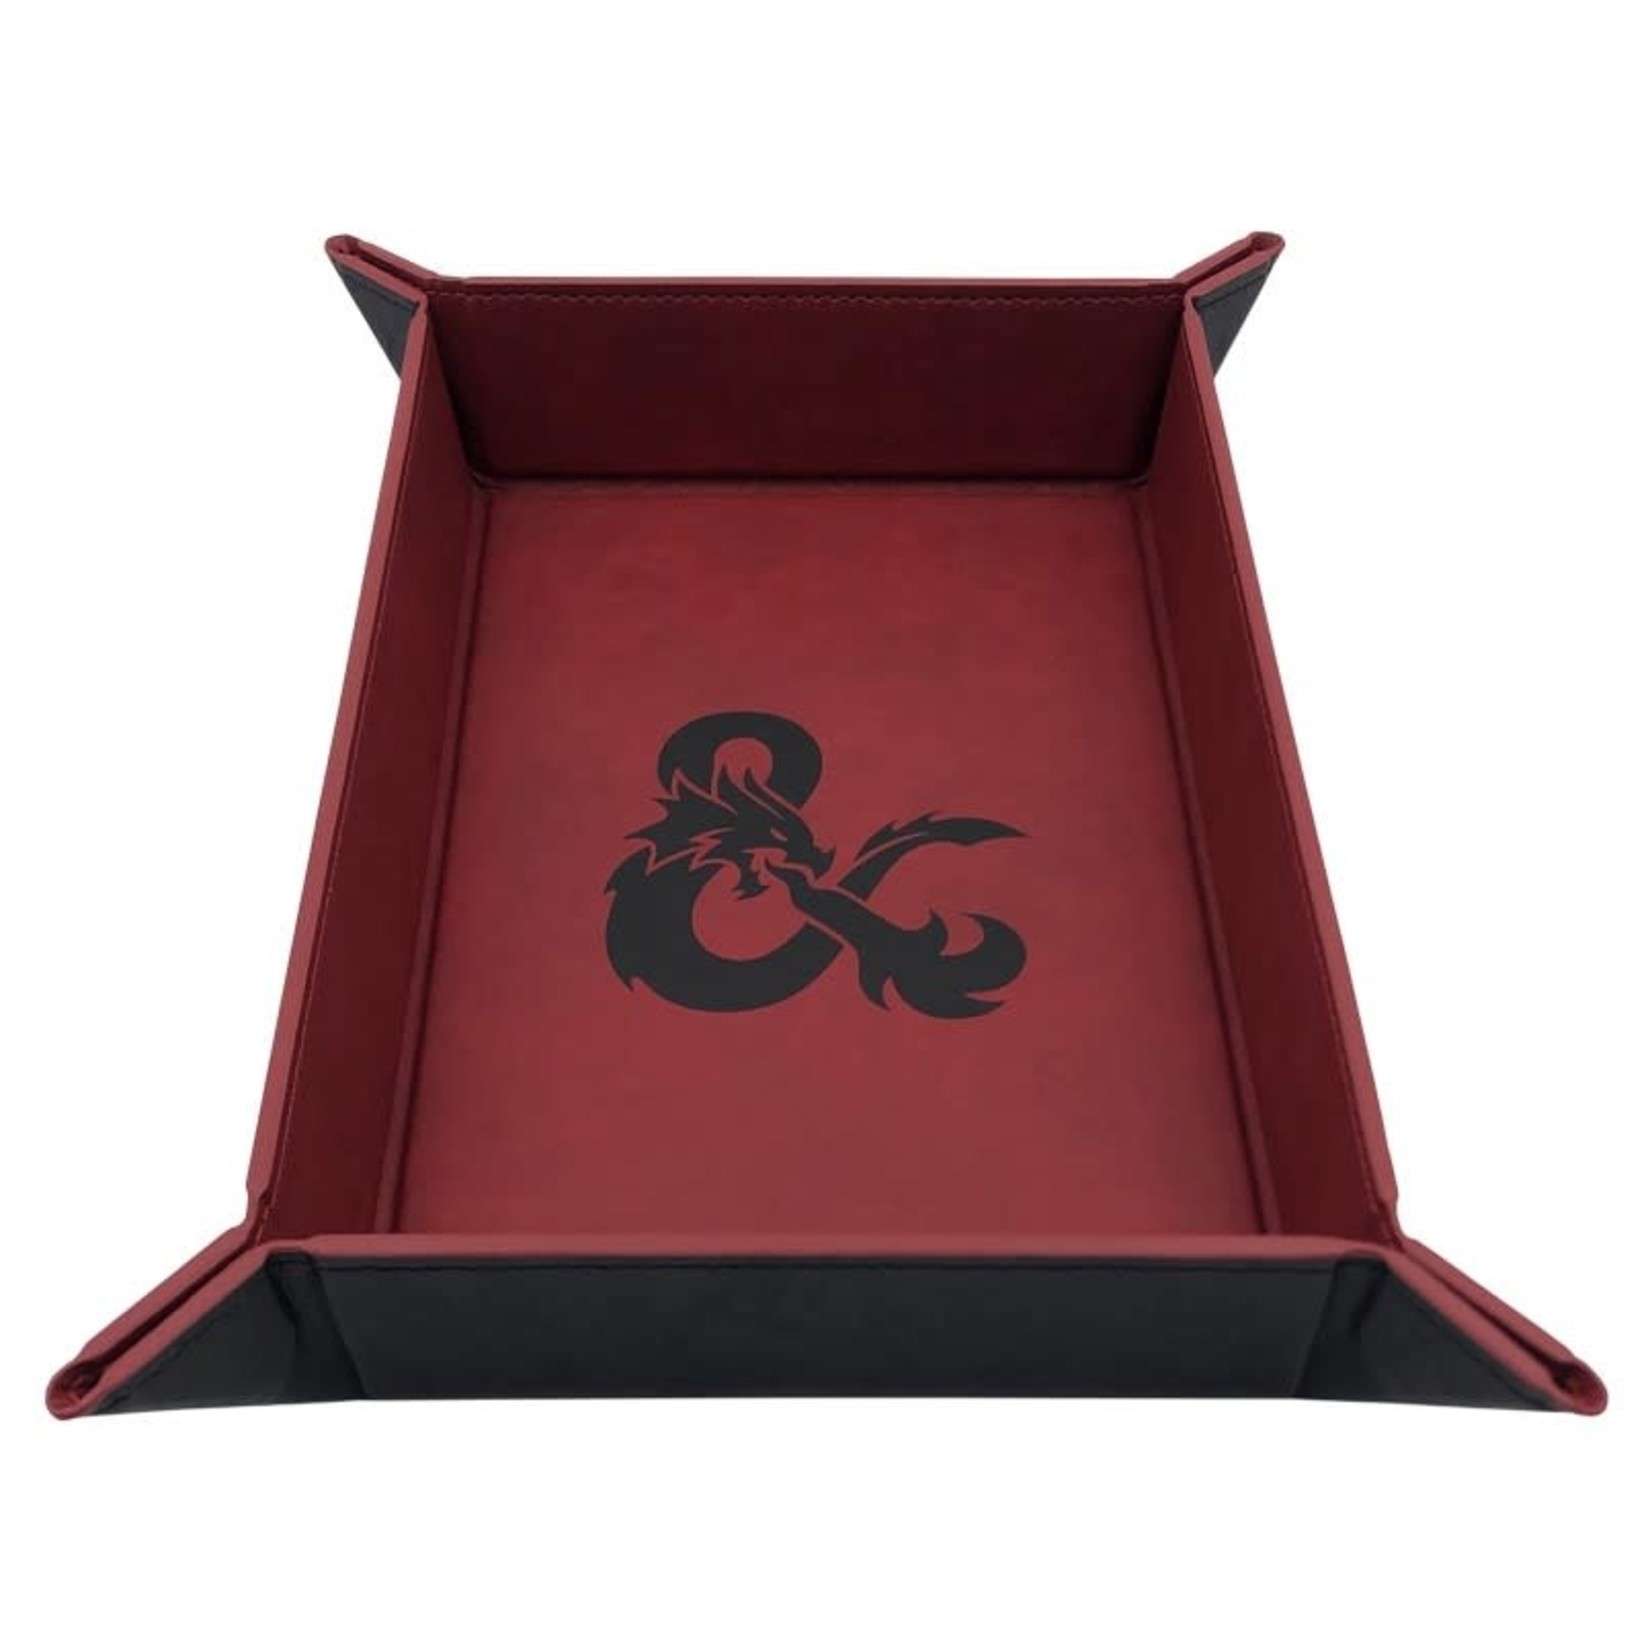 Dice Tray: D&D: Foldable Red & Black